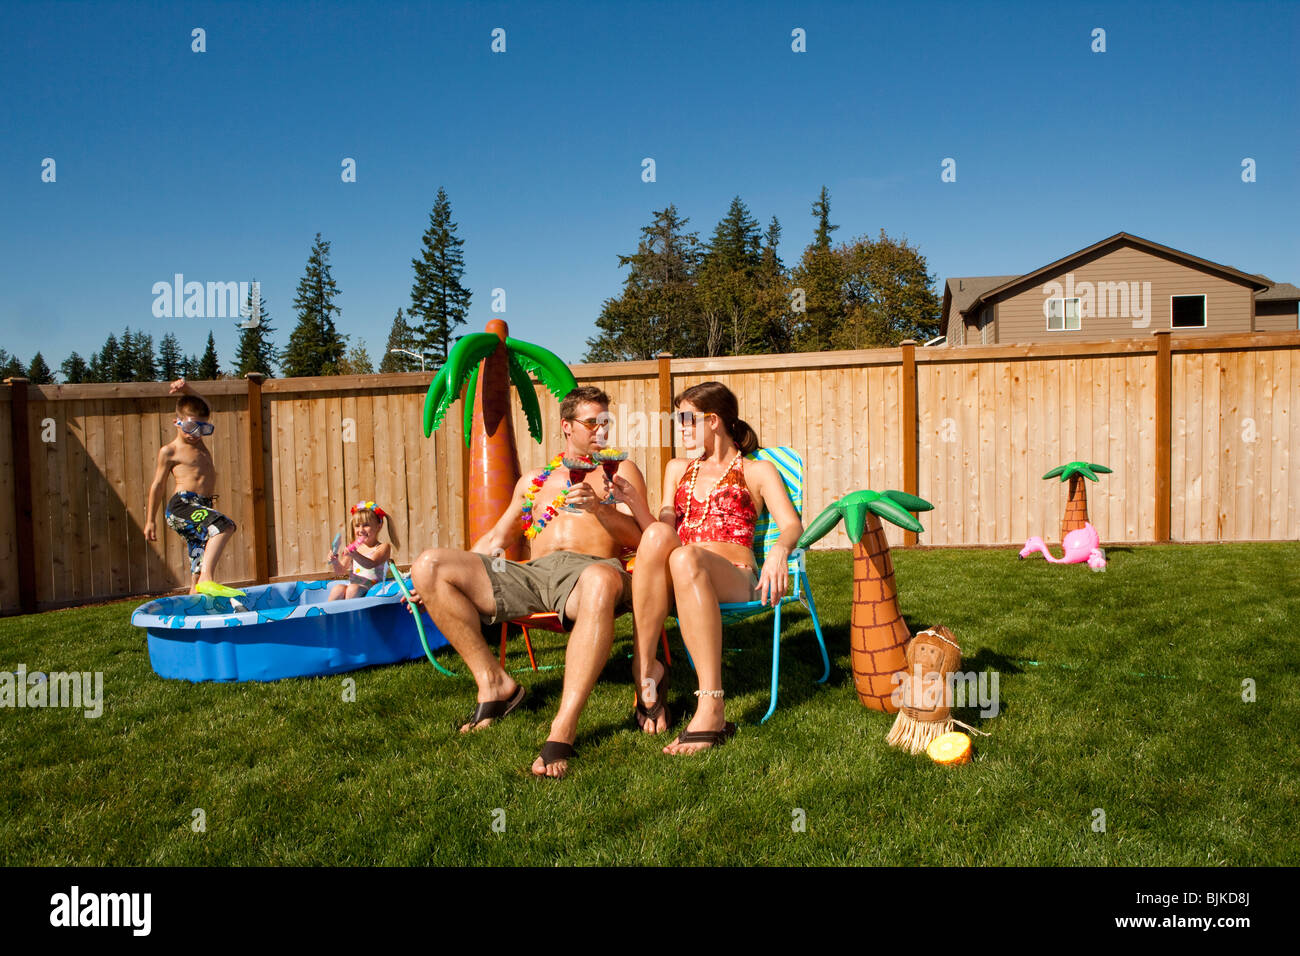 Family in yard with children's pool and cocktails Stock Photo